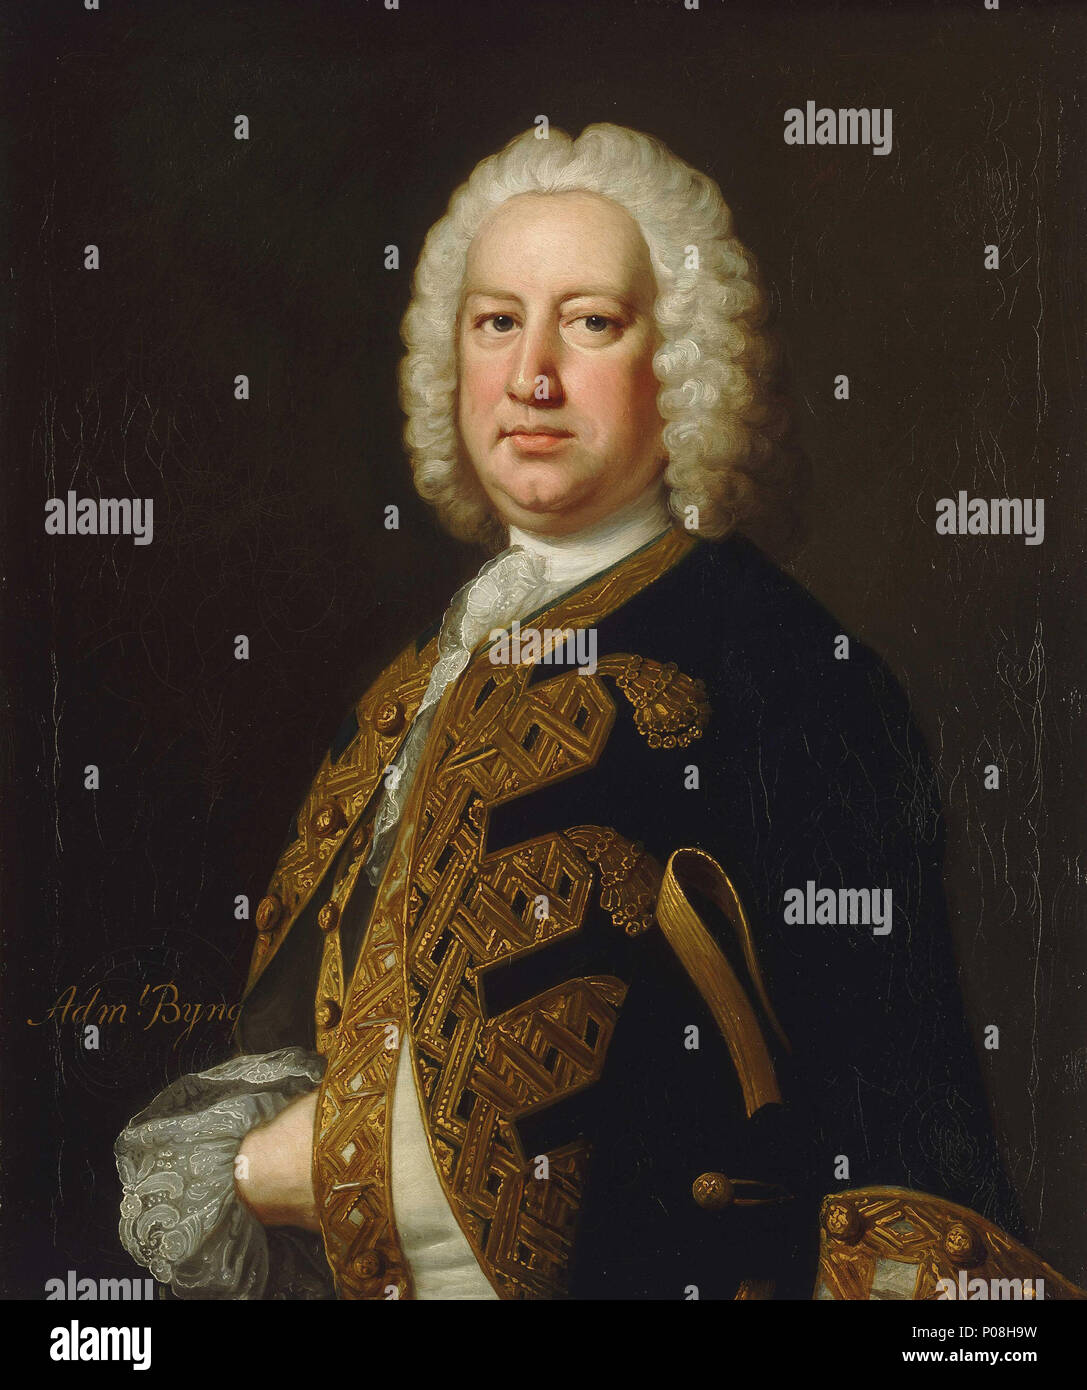 .  English: Admiral Fitzroy Henry Lee, 1699-1750 Admiral Fitzroy Henry Lee is shown in flag officer’s full dress uniform, 1748–1767, and a short white full wig. The portrait was at some point inscribed ‘Adml. Byng’ but this attribution of the sitter is now considered incorrect. Lee was the son of Lady Charlotte Fitzroy, 1664-1718. She was a illegitimate daughter of Charles II and Barbara Villiers, Duchess of Cleveland. He entered the Navy in 1717 and commanded the 'Pembroke', 60 guns, in the Mediterranean, 1738-42. In 1746 he went as Commodore and Commander-in-Chief at the Leeward Islands, whe Stock Photo